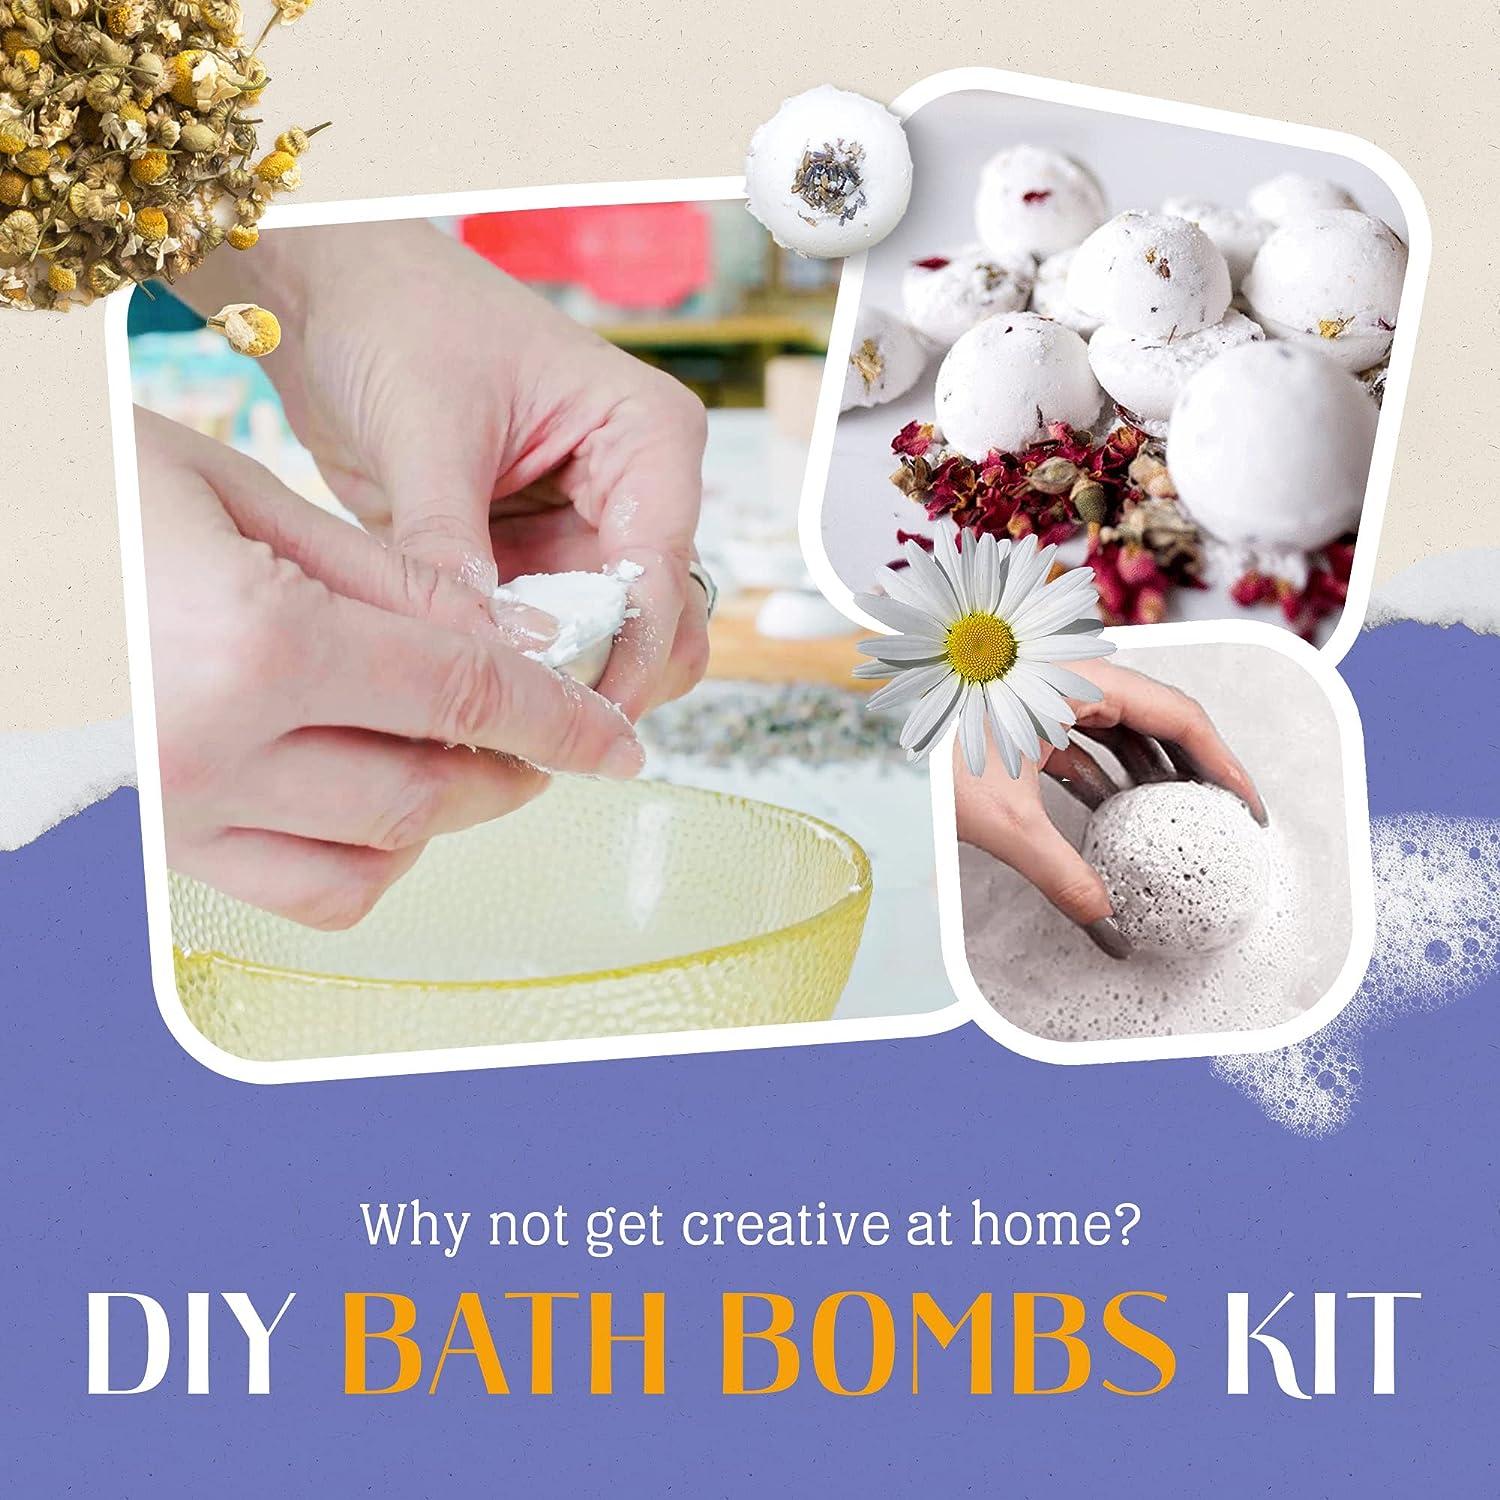  Earthy Good DIY Bath Bomb Kit With Organic Ingredients 100%  Natural Includes: Essential Oils, Dried Rose, Chamomile & Lavender, Molds,  Guide & More- Includes Furoshiki Cloth- Makes 10 Mini Bath Bombs 